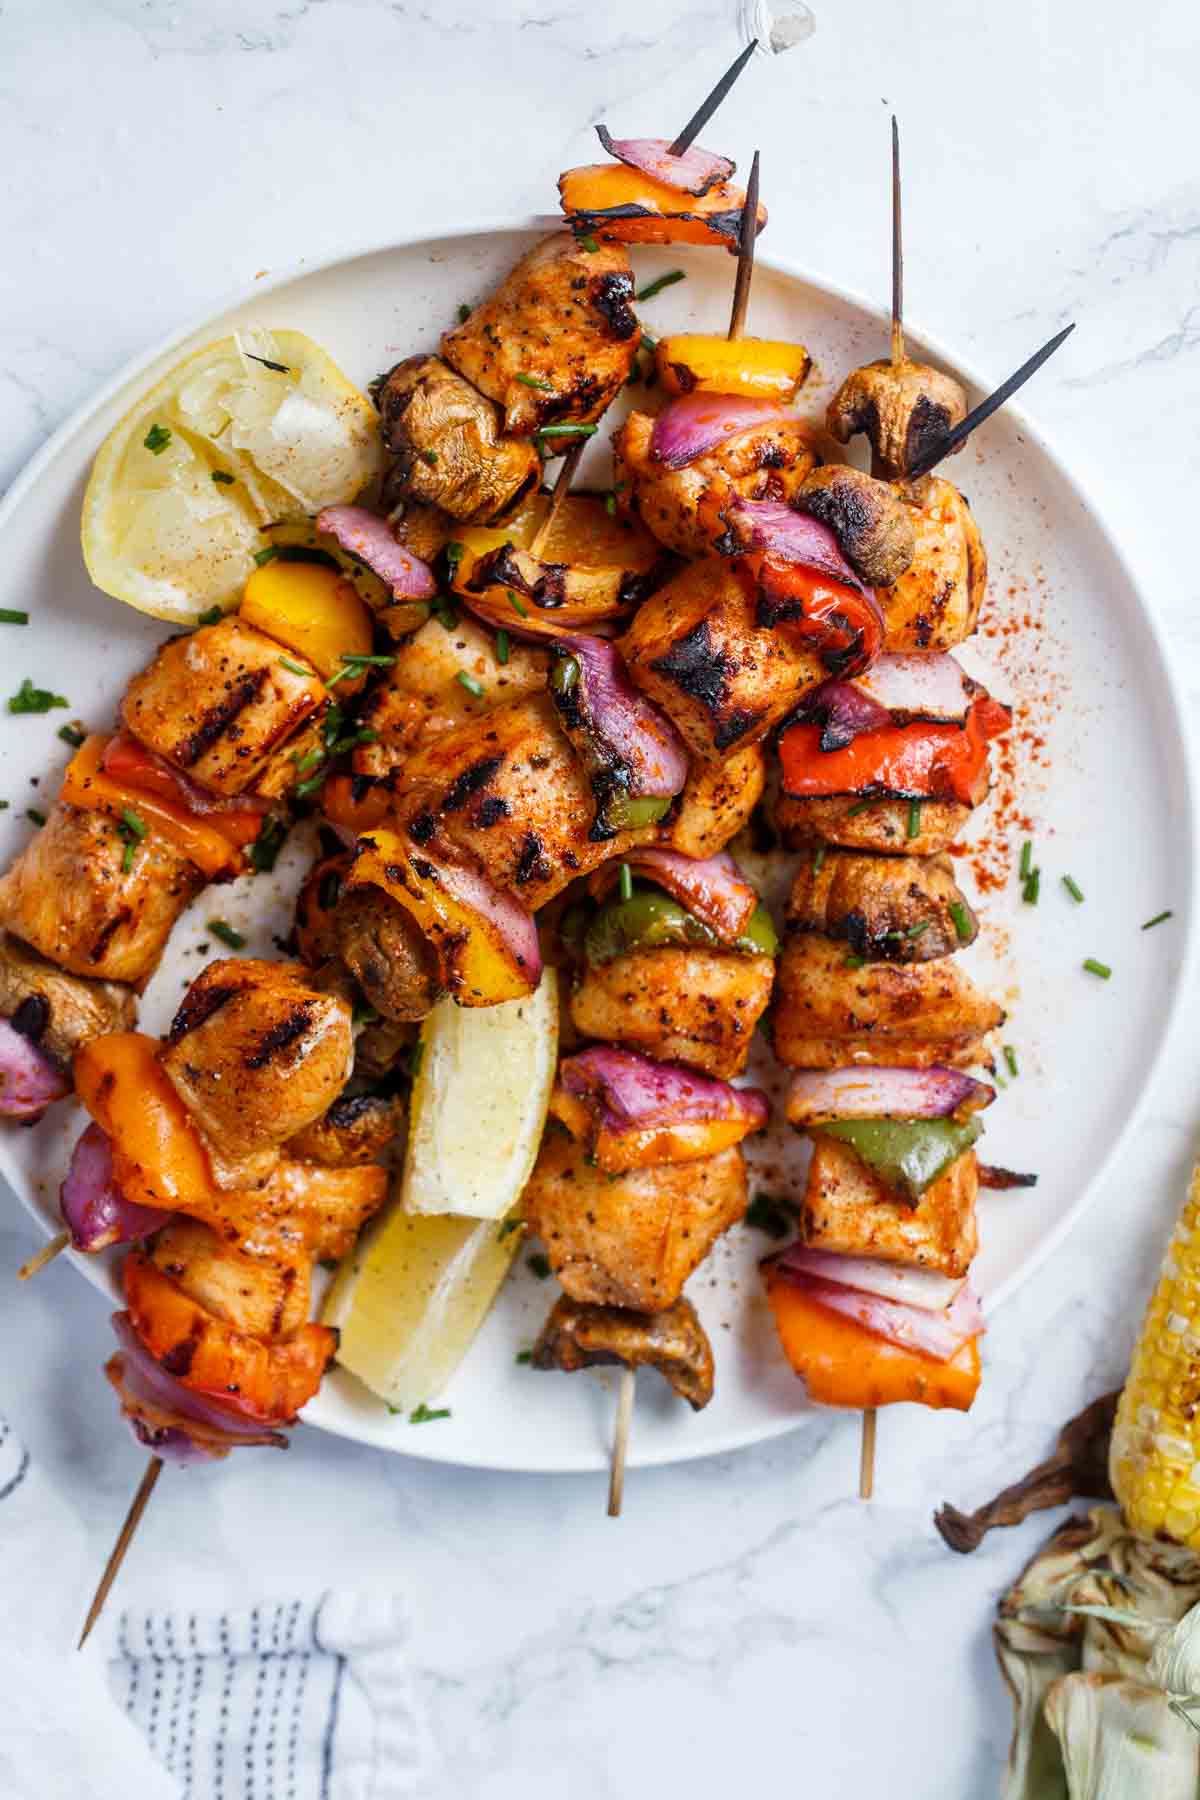 Kebabs on a stick with vegetables stacked on a plate.